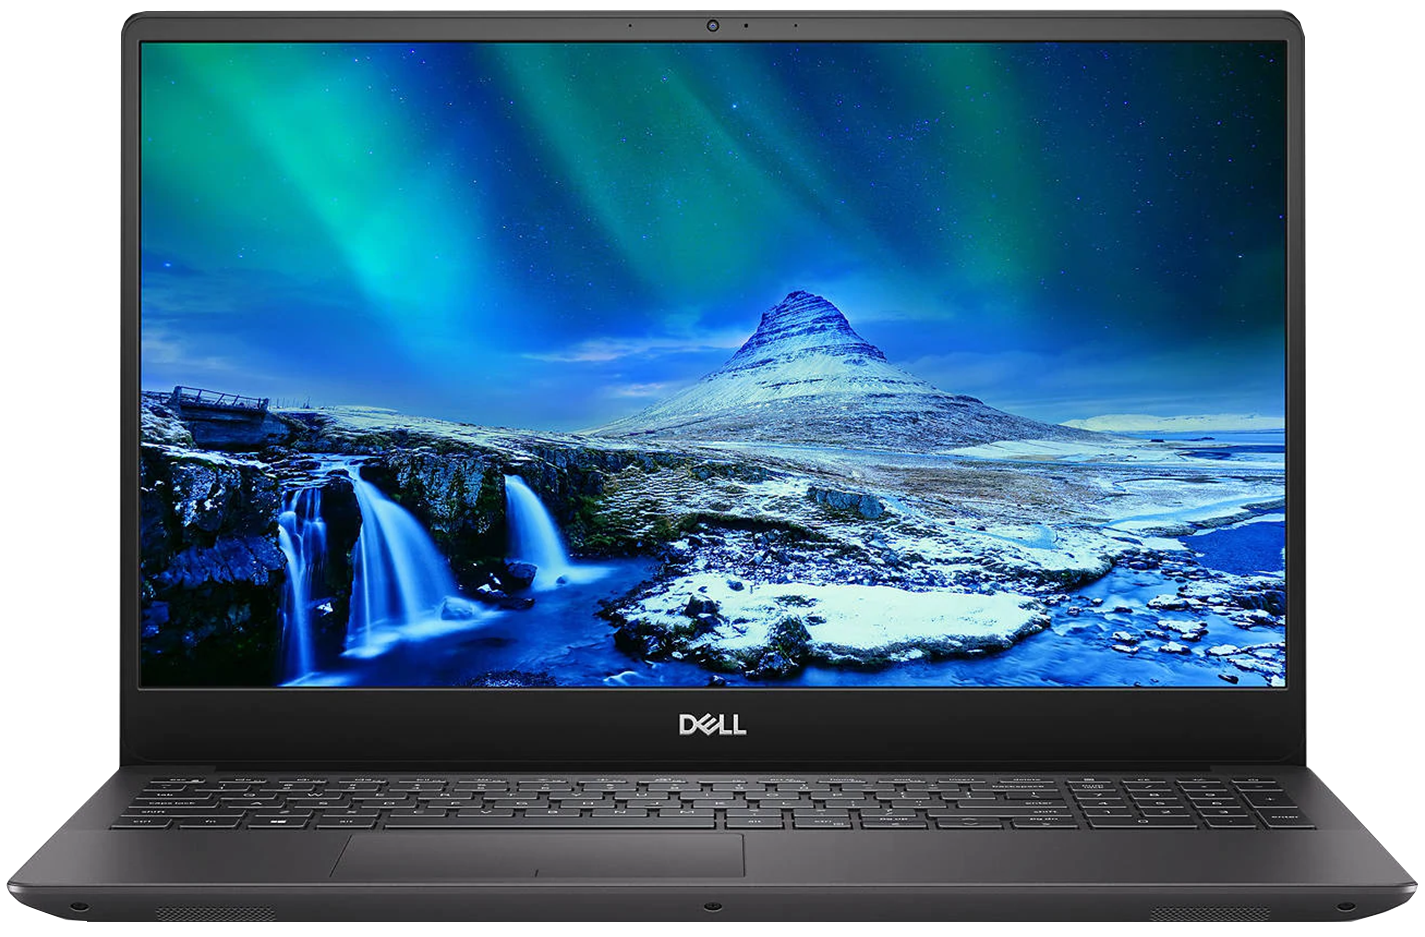 Dell Inspiron 15 7590 - Specs, Tests, and Prices | LaptopMedia.com